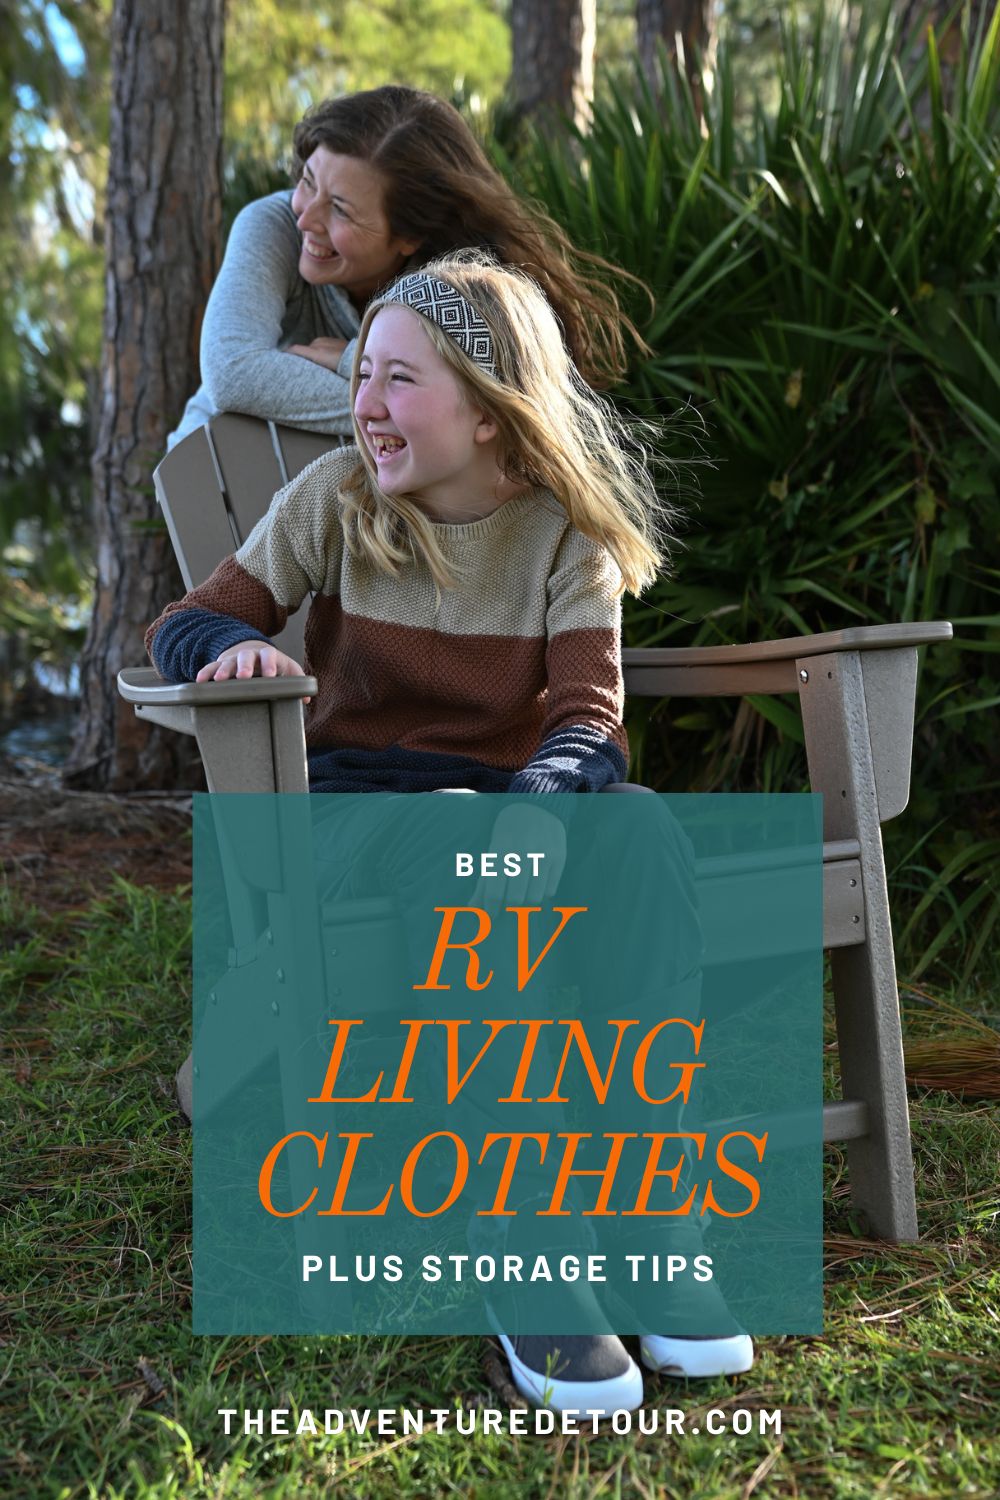 Mom And Daughter Sitting By The Lake - Best Camping Clothes For RV Living